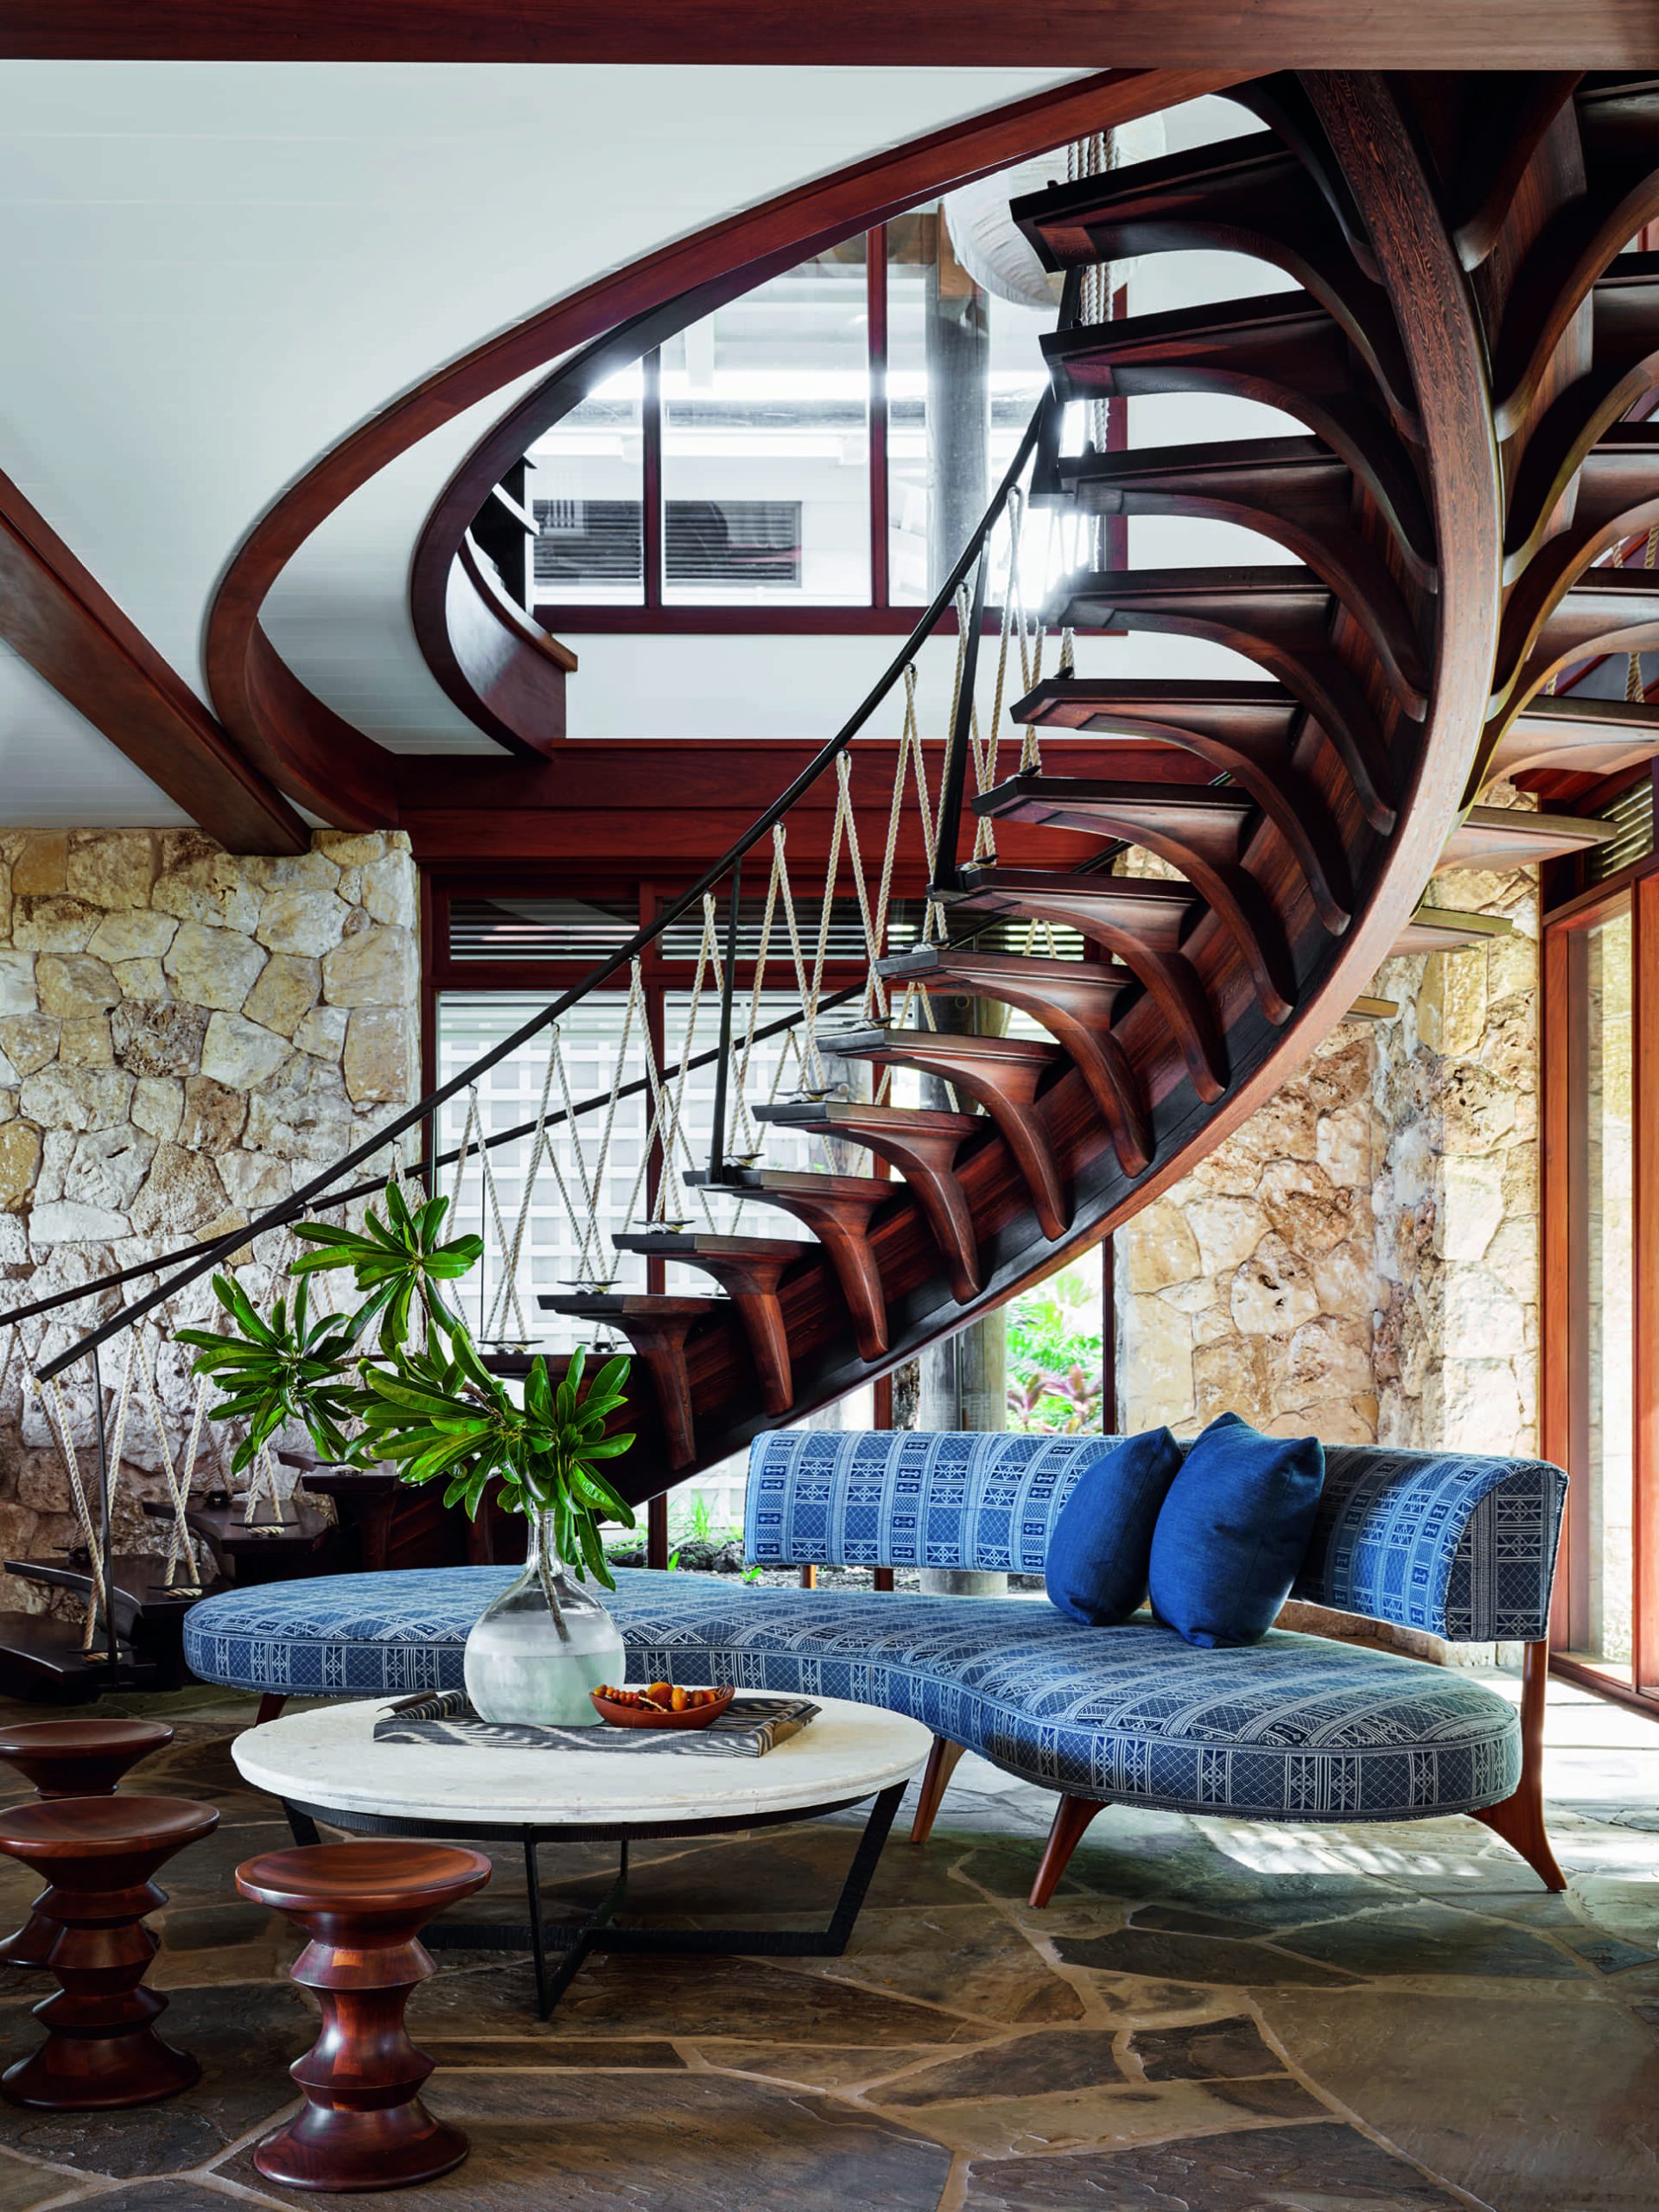 Carved wooden spiral staircase at a kite surfer's Hawaii estate. Interior by Martyn Lawrence Bullard.